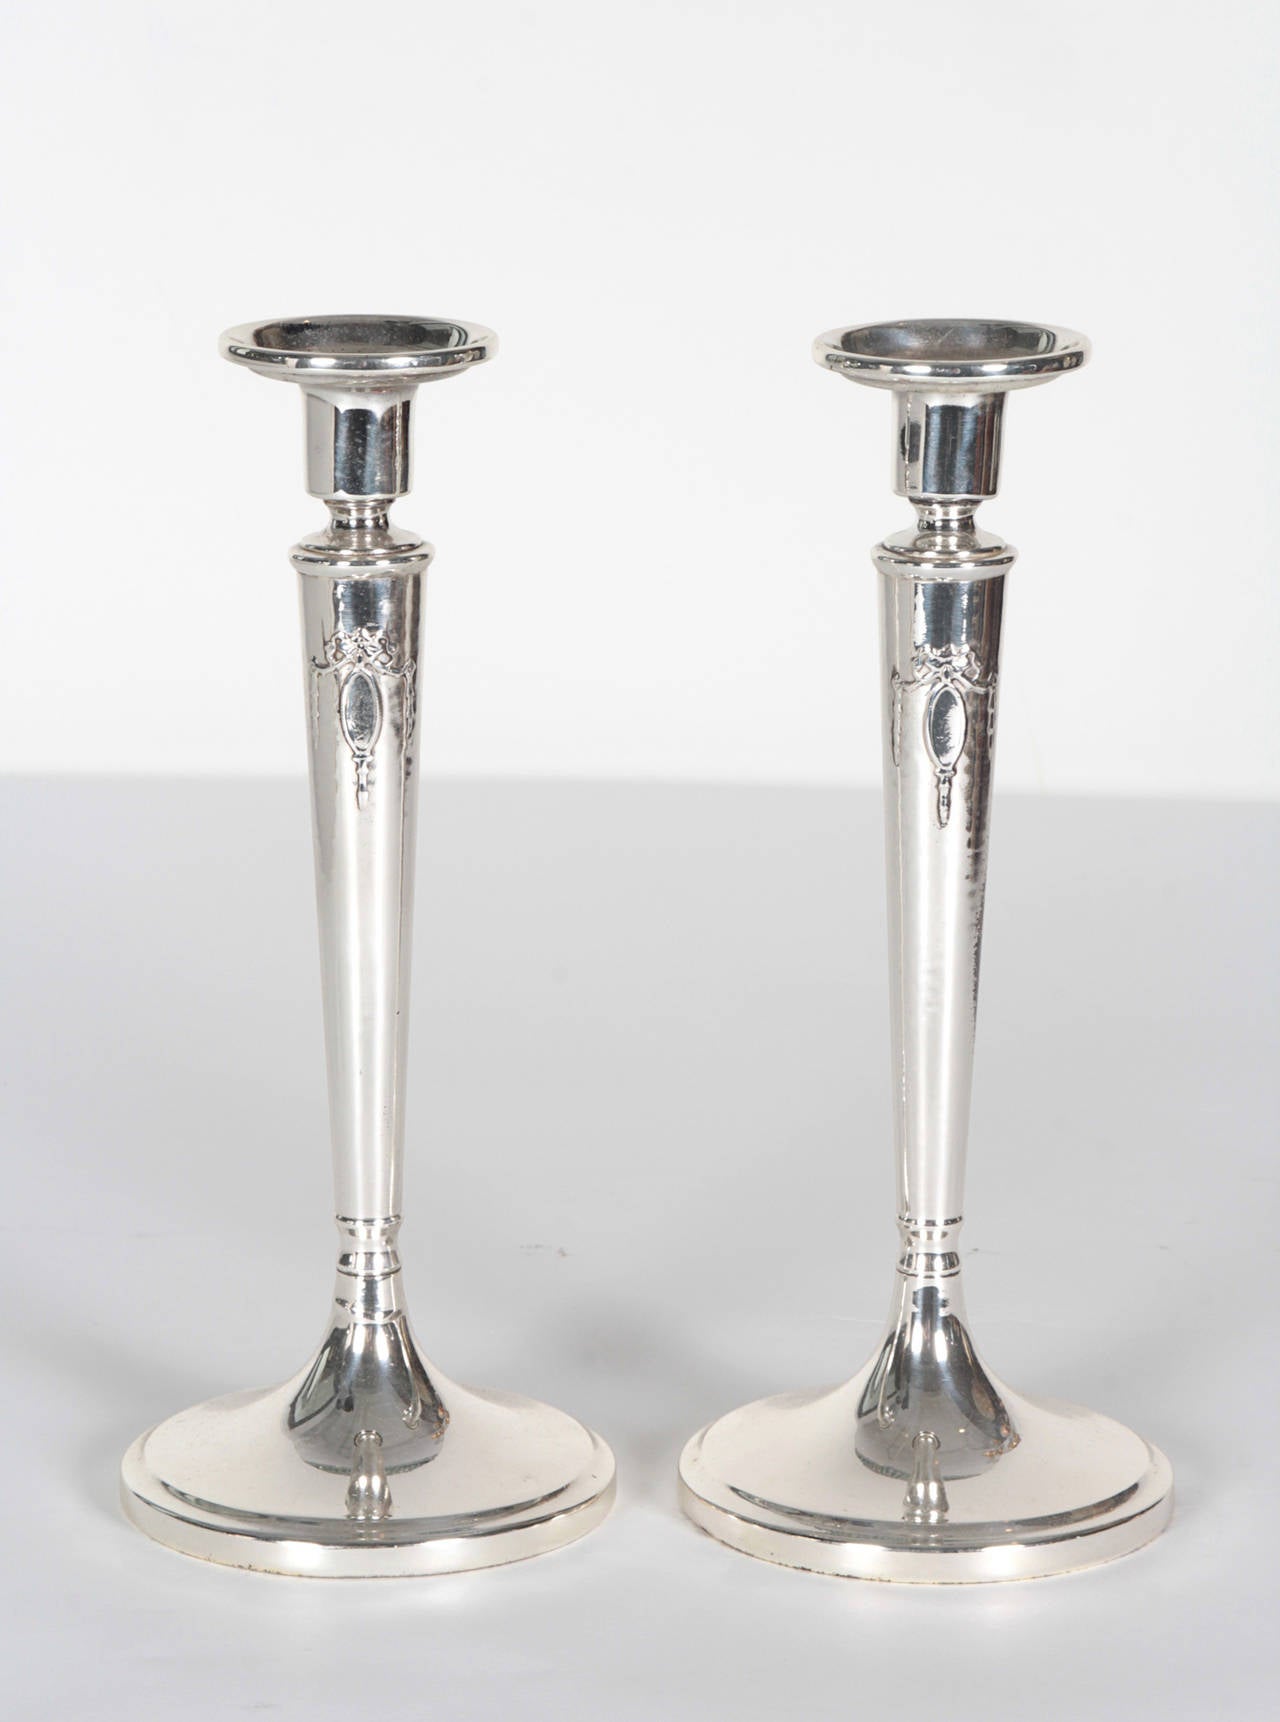 Pair of English Art Deco sterling silver candlesticks with a tied ribbon bow detail on a tapering column body. Stamped on bottom.